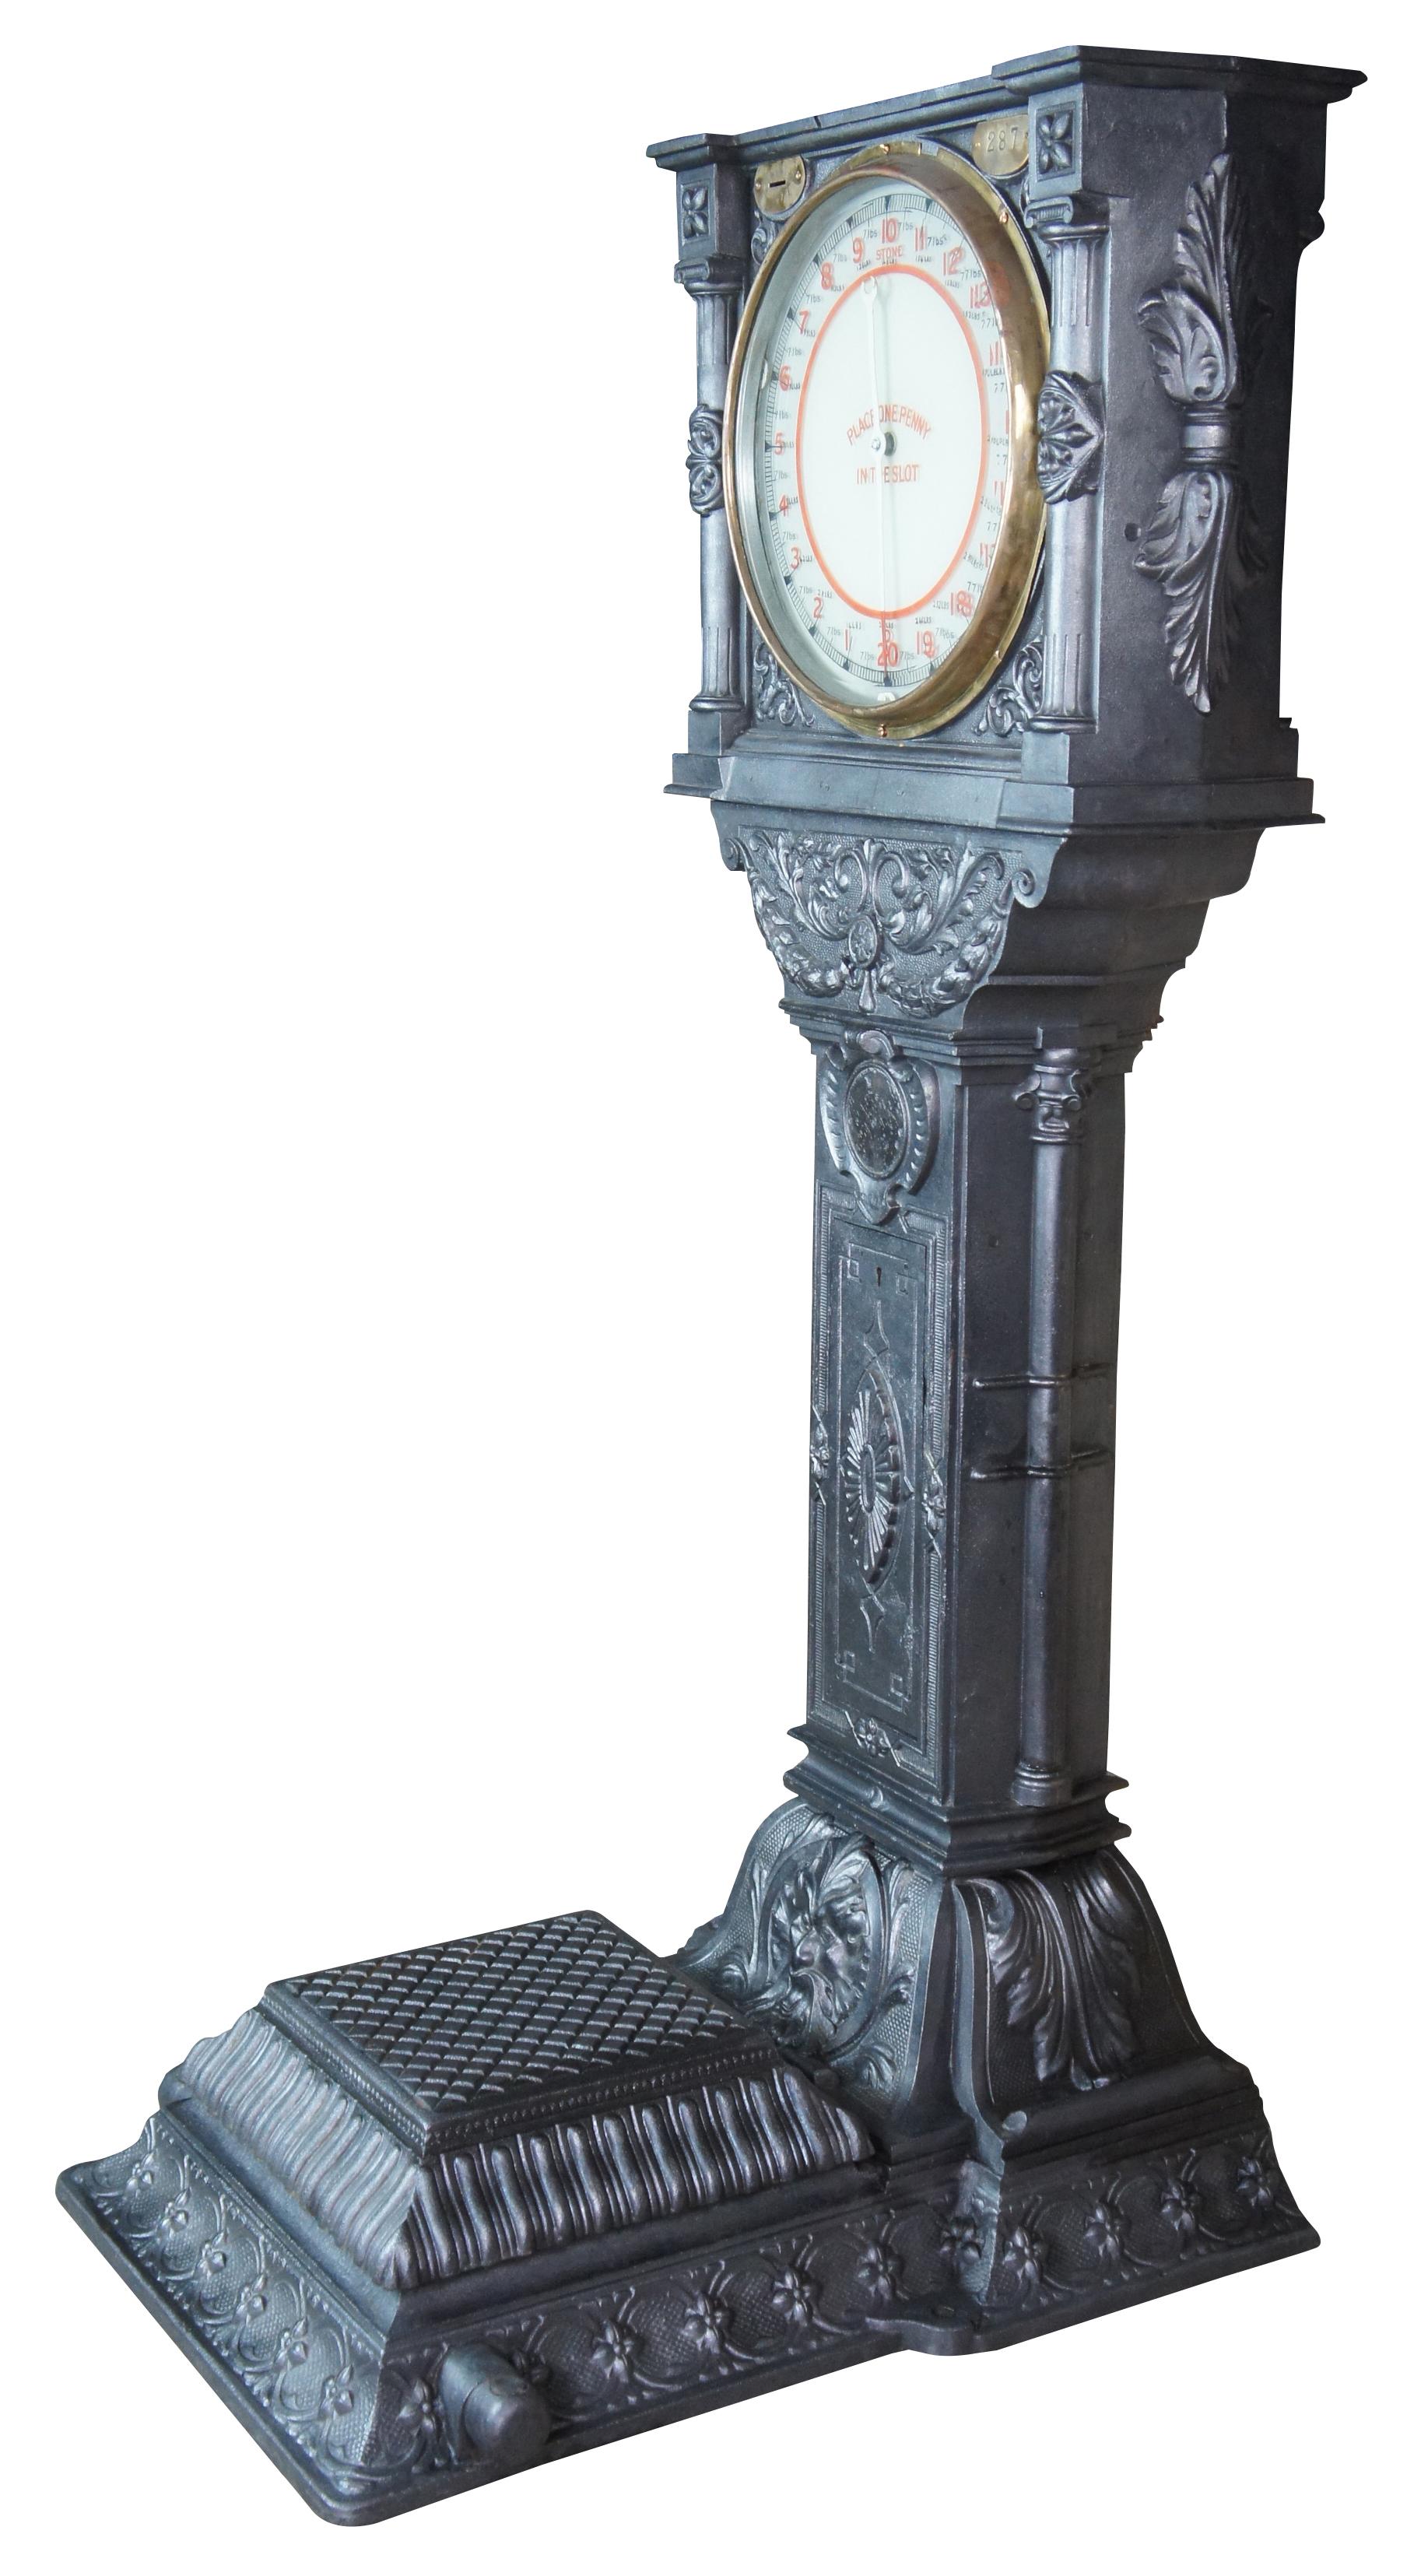 Exquisite museum quality English Imperial penny scale, circa early 20th century. Attributed to Australasian Automatic Weighing Machine Co. Ltd. Made from heavy cast iron with a gunmetal finish featuring high relief scalloping, acanthus leaves,